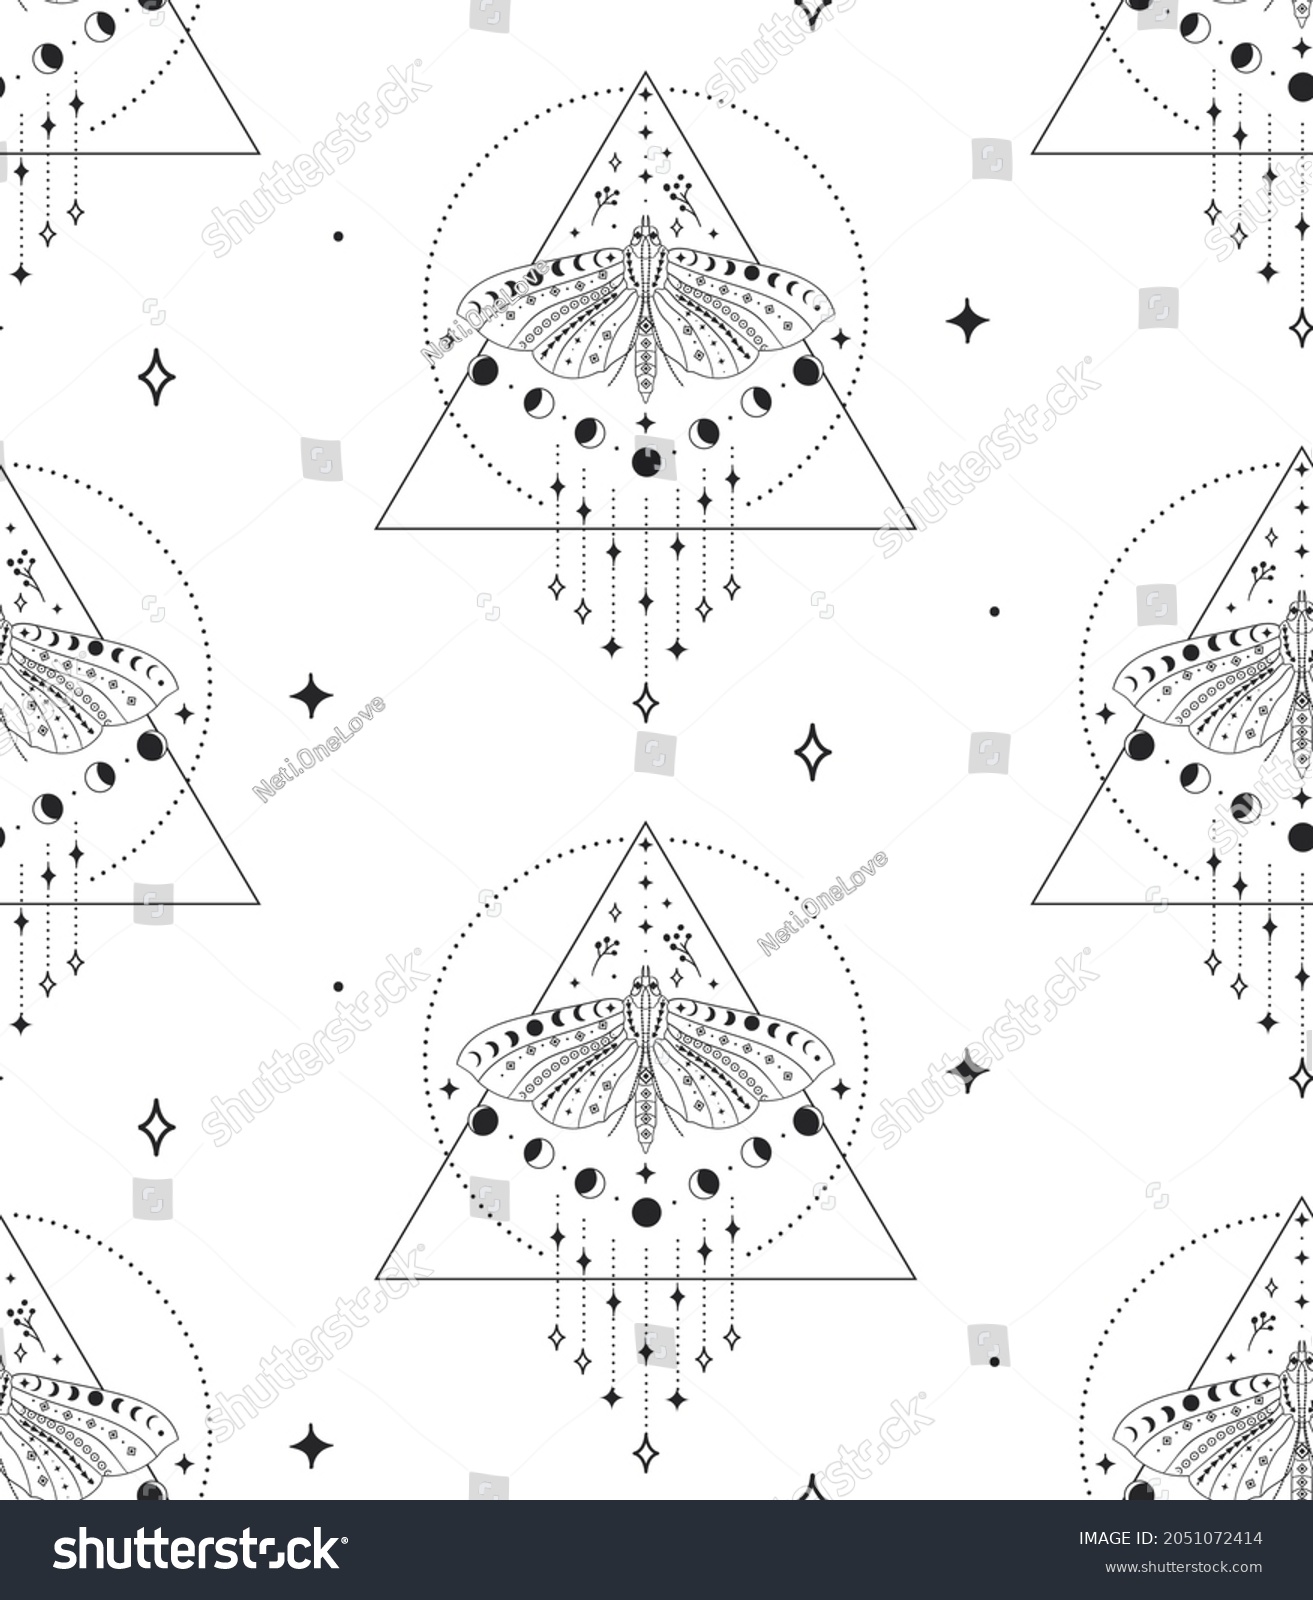 SVG of Abstract Background Seamless Pattern with Triangles, Circles, Moon Phases, Batterflies, branches, berries. Mystic Design, Vector Illustration for wrapping tissue paper svg